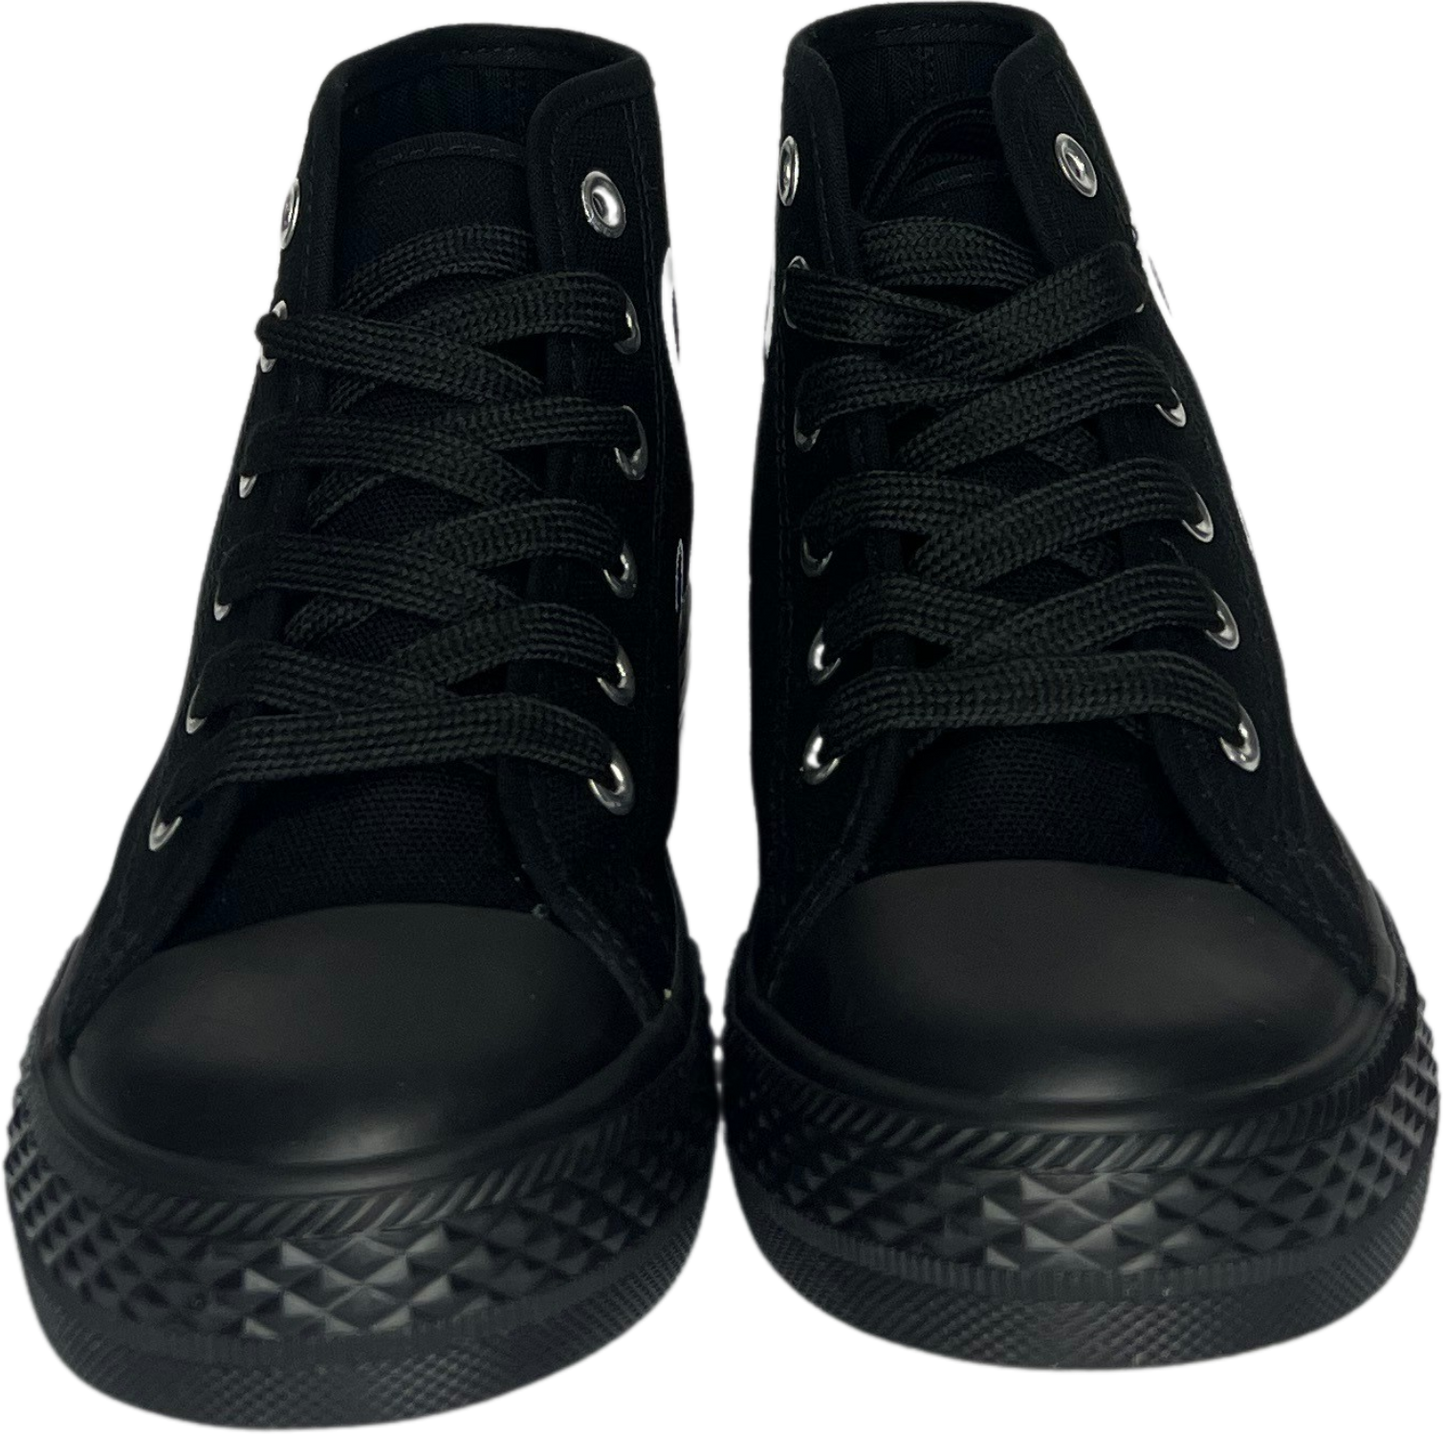 Frantz Lamour Signature Classic Kids High Top Canvas Lace Up Casual Walking Shoes - Black & White